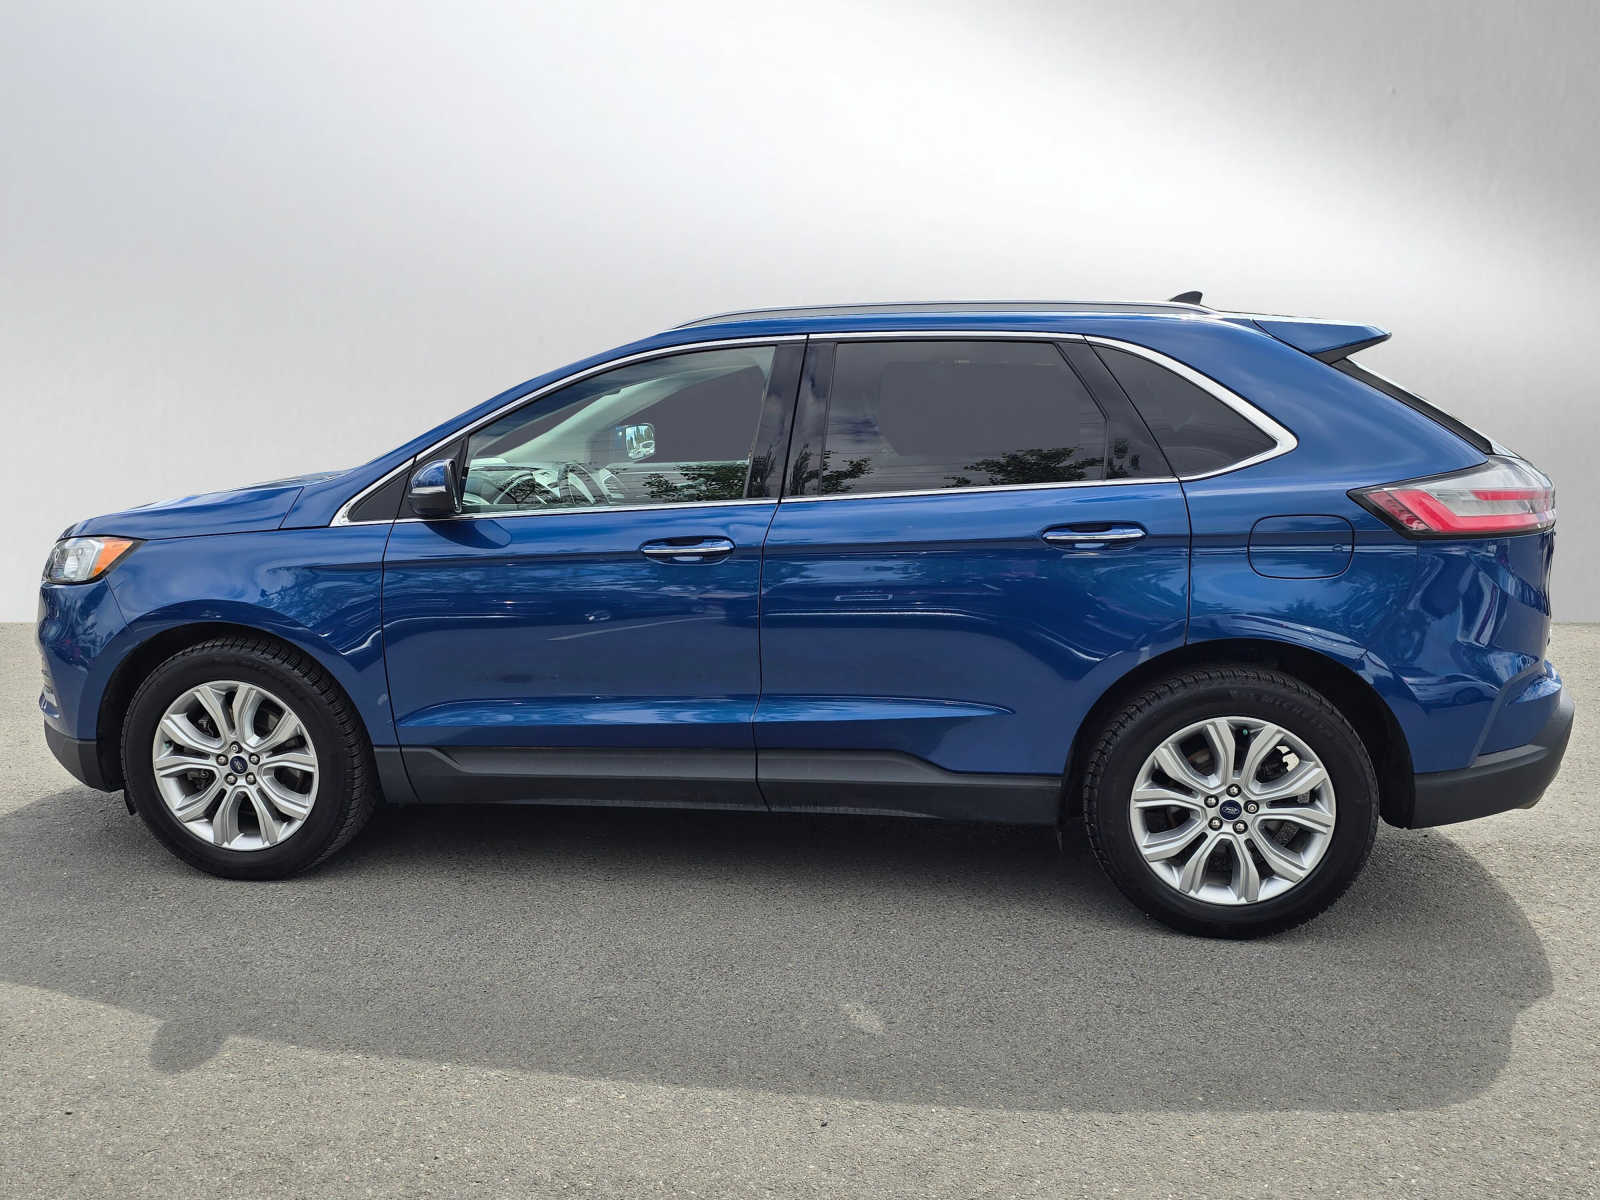 Used 2020 Ford Edge Titanium with VIN 2FMPK4K97LBB41805 for sale in Anchorage, AK